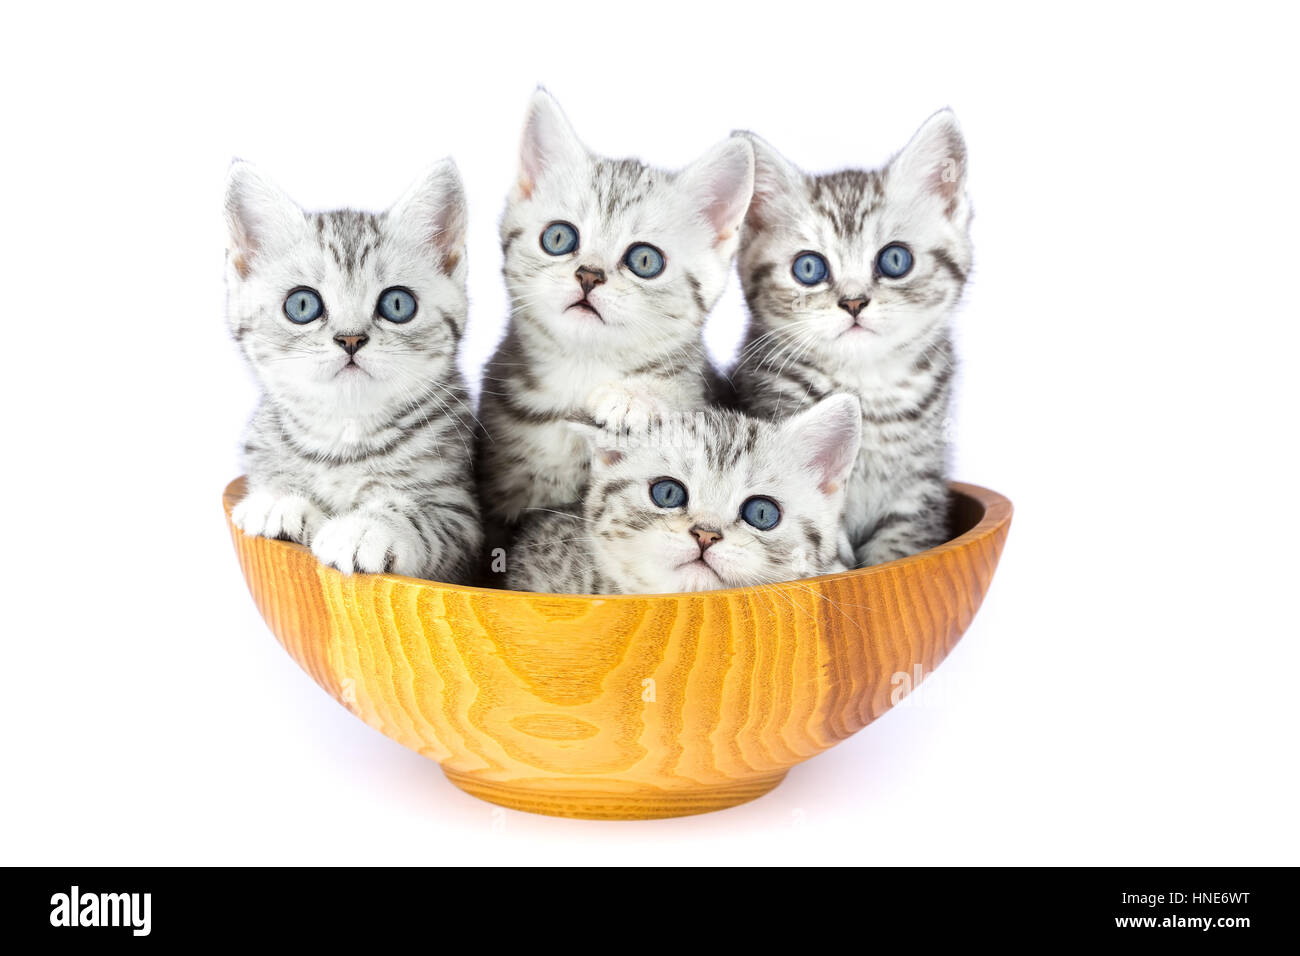 Four young kittens sitting in wooden bowl isolated on white background Stock Photo